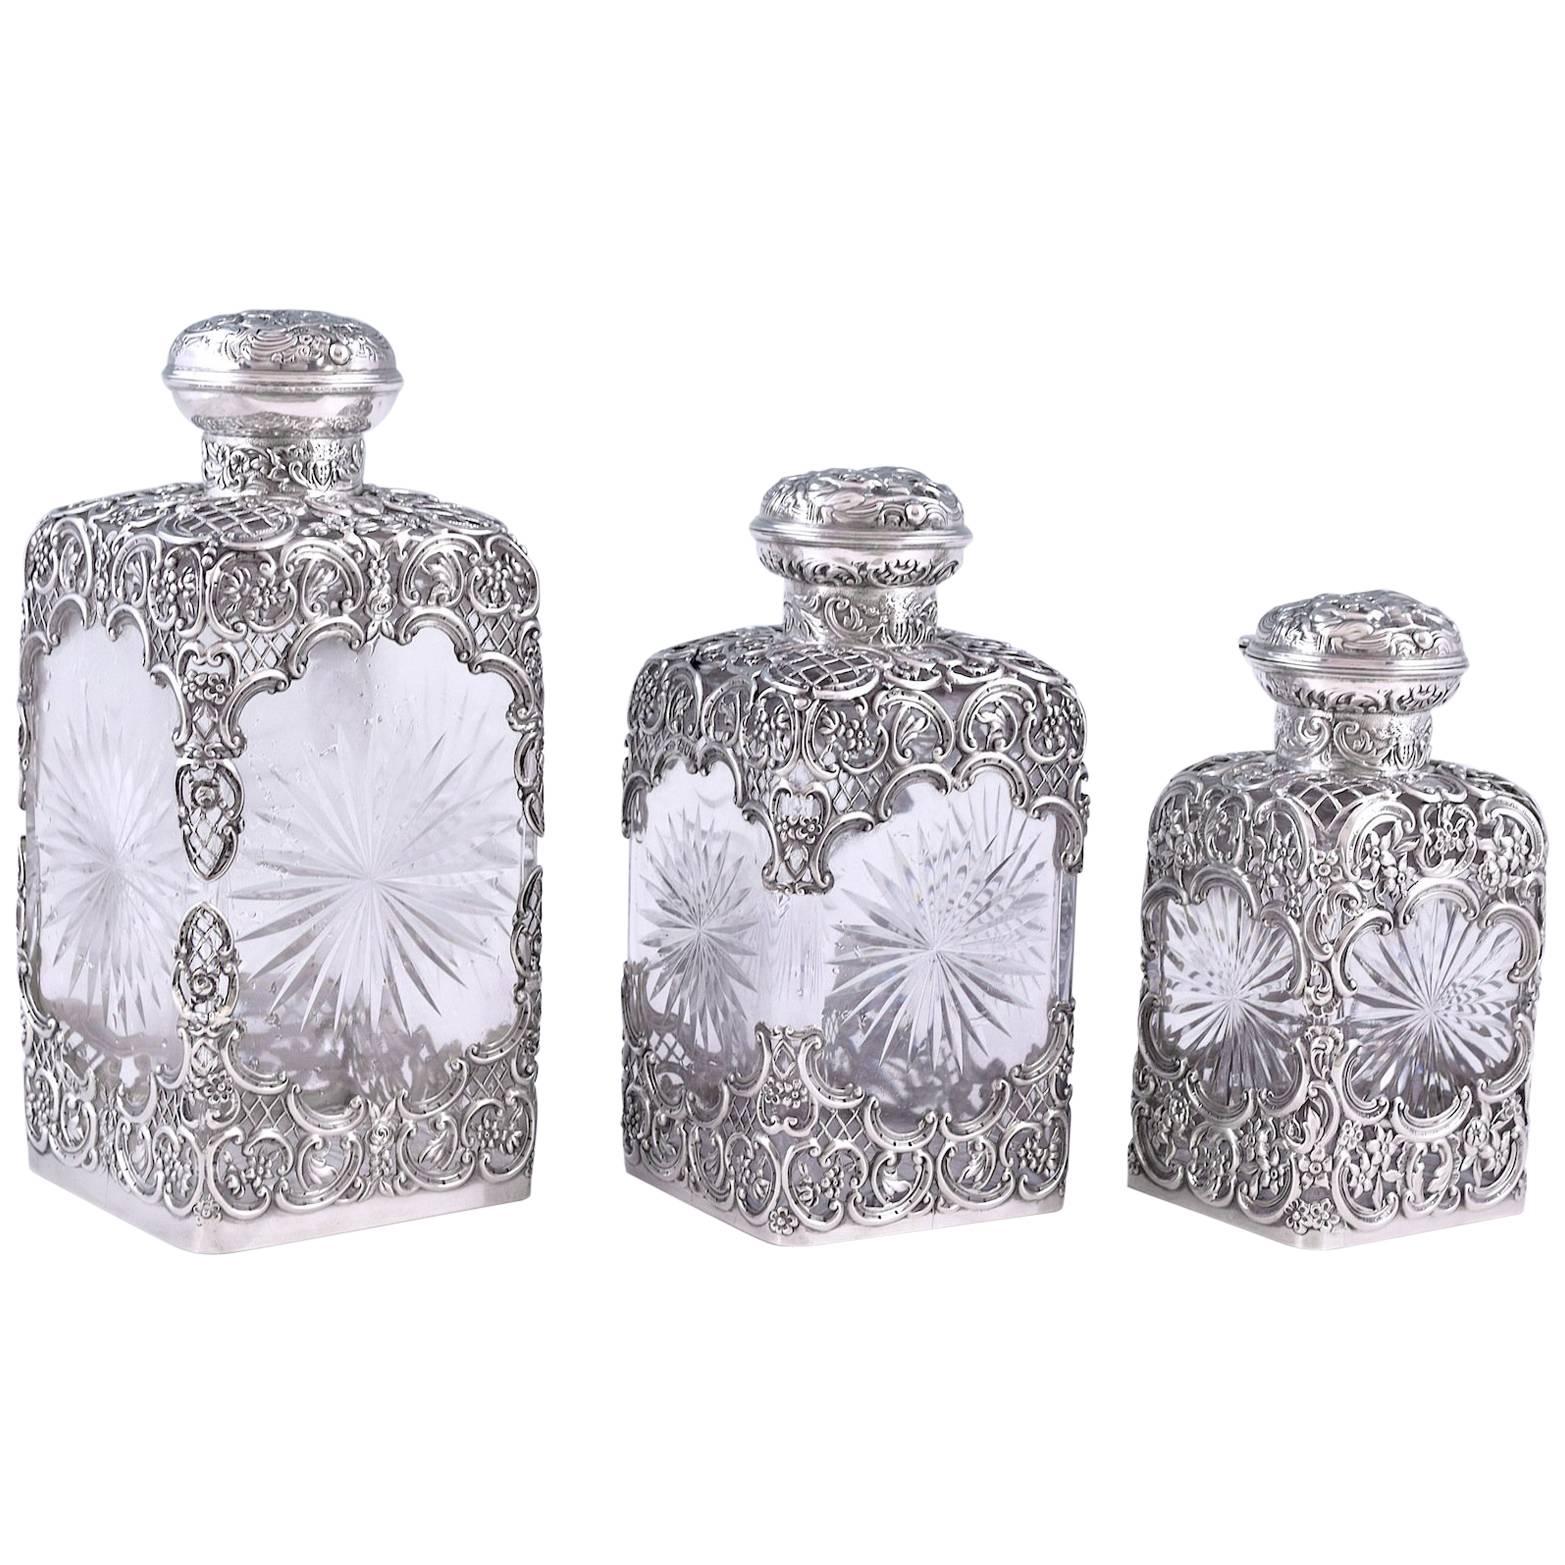 Three Edwardian Silver Mounted Glass Perfume Bottles For Sale